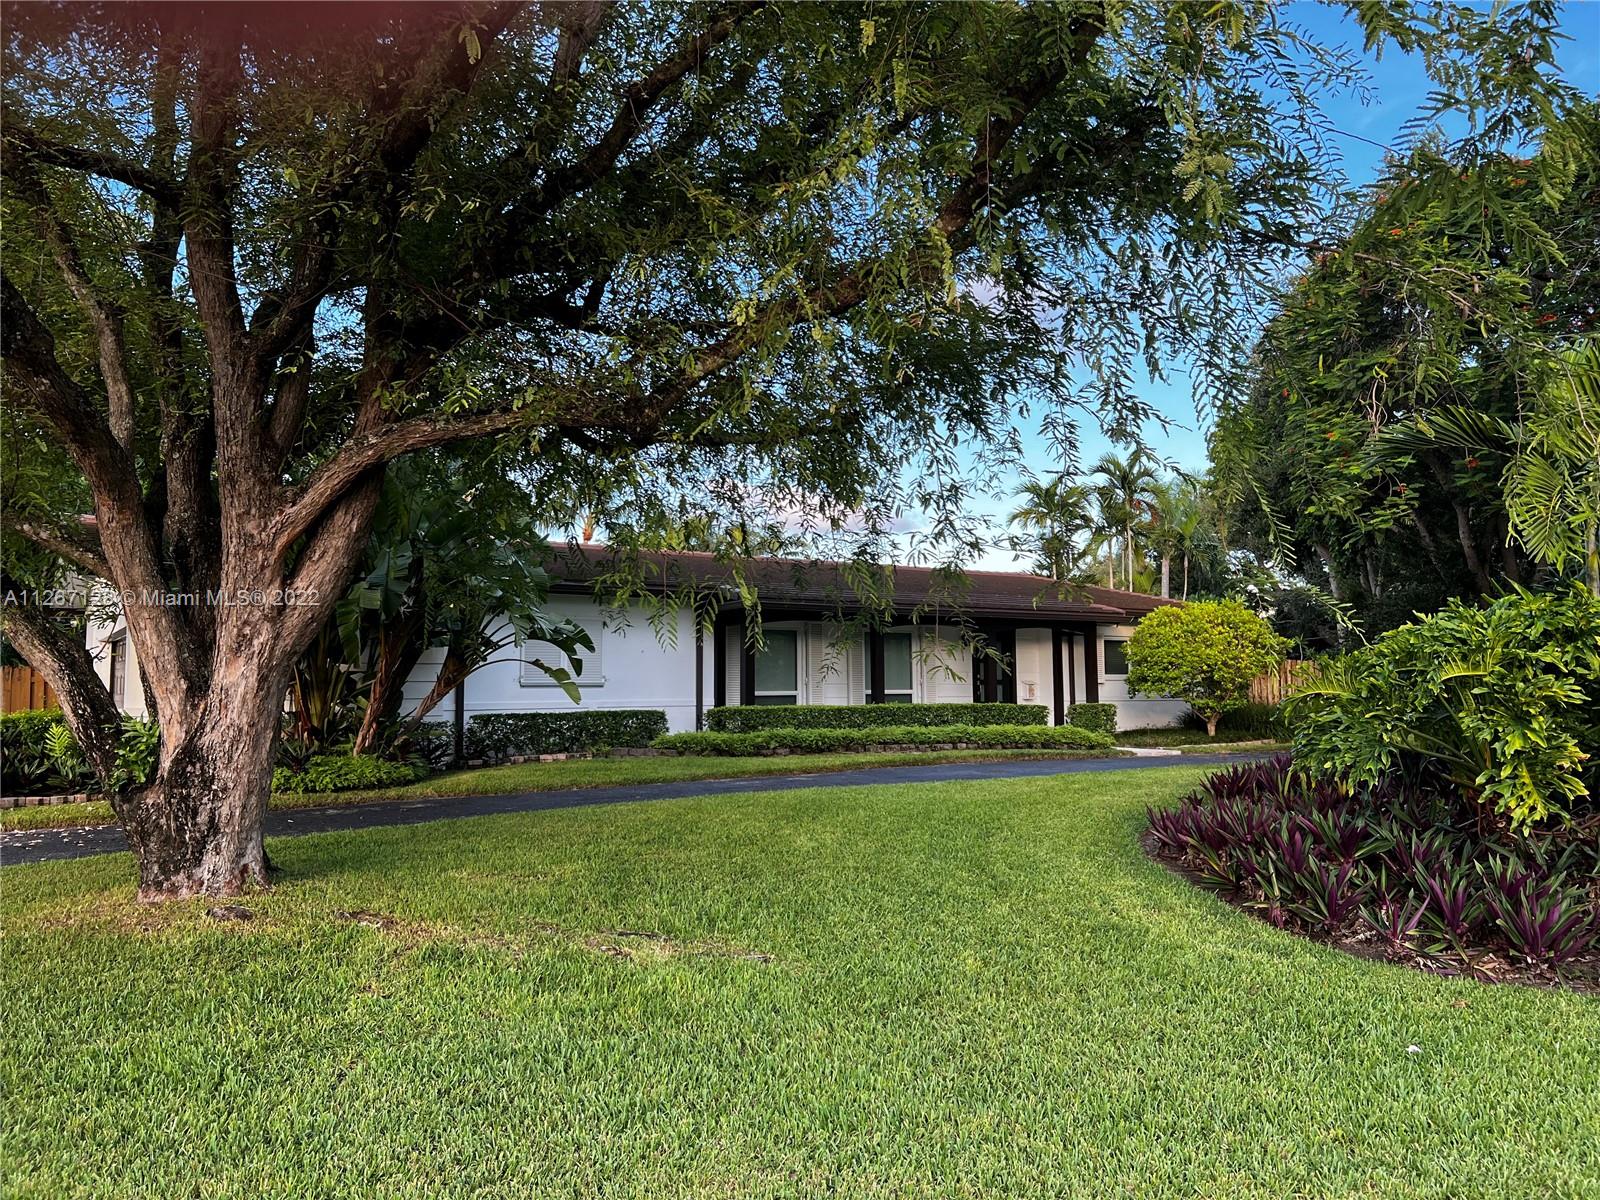 This amazing 0.52- acre corner house is located in one of the best and most serene neighborhoods in Pinecrest on the water. Surrounded by lush tropical and native plants, is a one-story home with an abundance of natural light with much to offer. New roof, Impact windows and doors all house, new A/C unit. All bedrooms with upgraded wood laminate flooring upgrade, new master bathroom with a walk-in shower and double shower. surveillance cameras, outdoor kitchen, two outdoor gazebos and more. Resurfaced and tiled pool, beach area with mature coconut palms, comfy swing and deep fire pit, sprinkler system. Dock for fishing or canoe/kayak loading. Come and enjoy the lifestyle that Pinecrest has to offer with A+ rated Palmetto schools, close to all major thoroughfares, parks, and shopping.